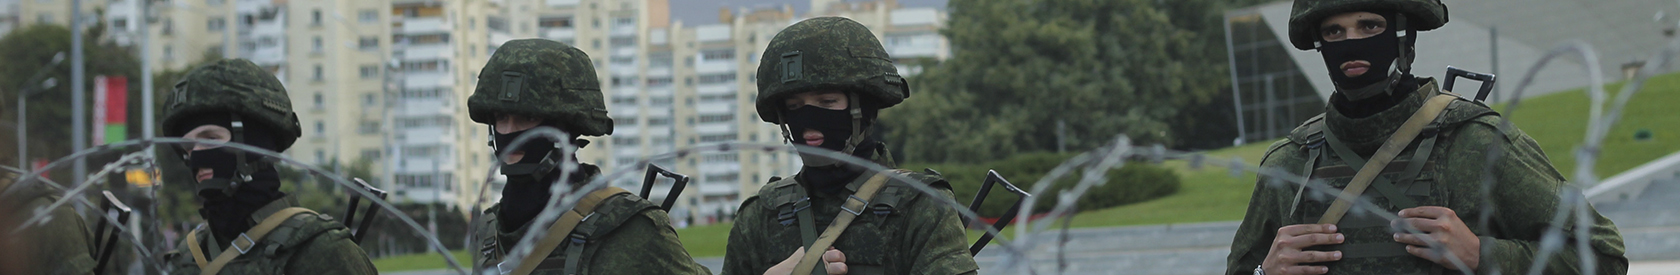 Situation with Evasion from Service in Belarusian Army-2022/2023 and Children’s Militarization in Belarus